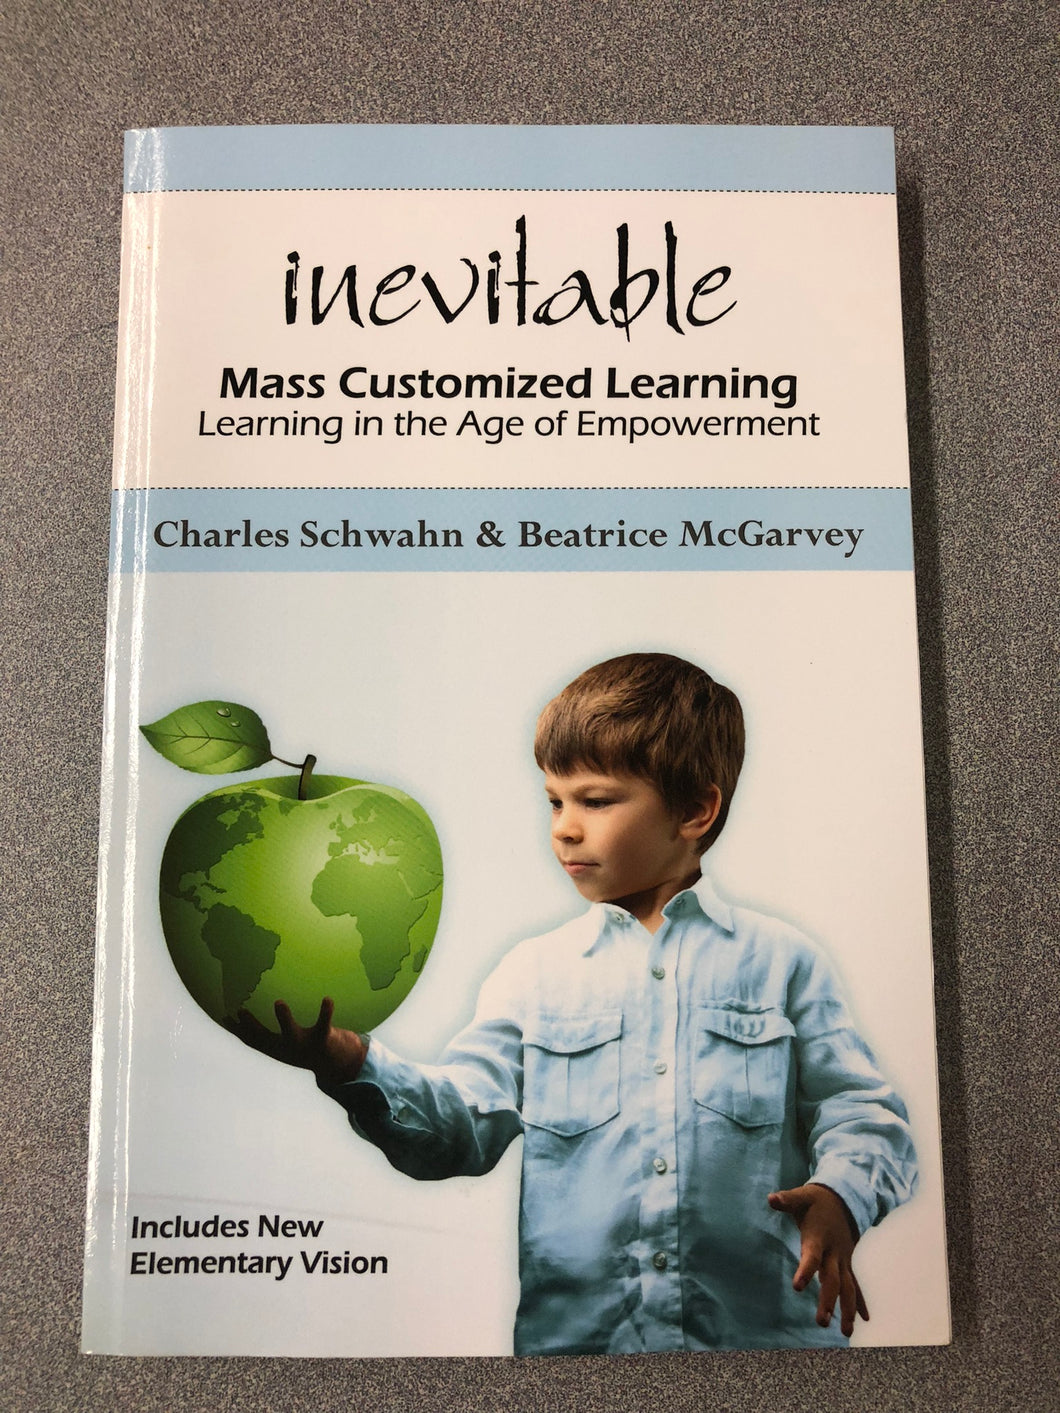 Inevitable: Mass Customized Learning: Learning in the Age of Empowerment, Schwahn, Charles and Beatrice McGarvey [2012] EM 7/22